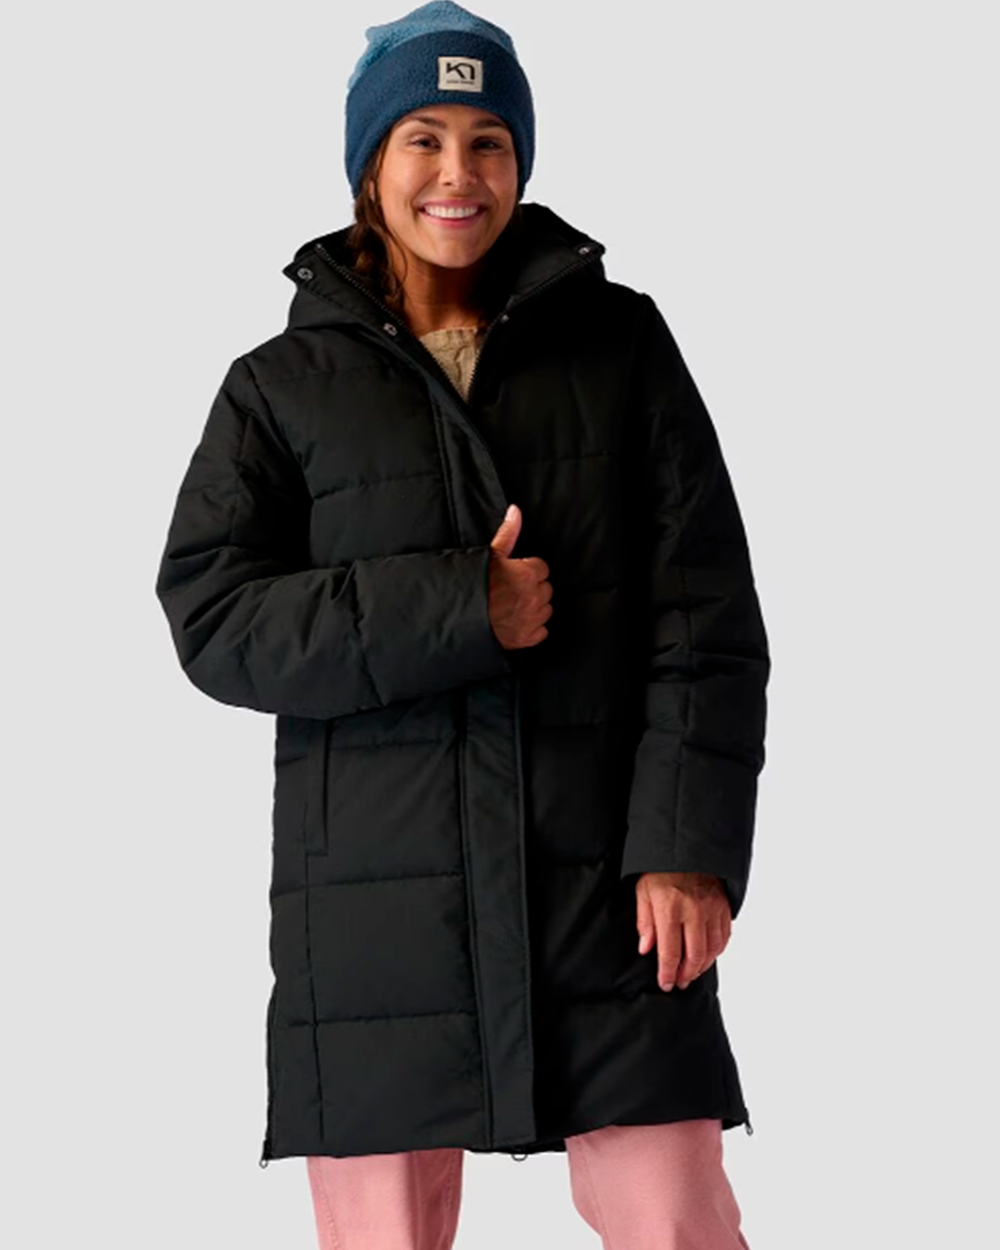 Insulated Snap Front Parka - Women's.avif.png